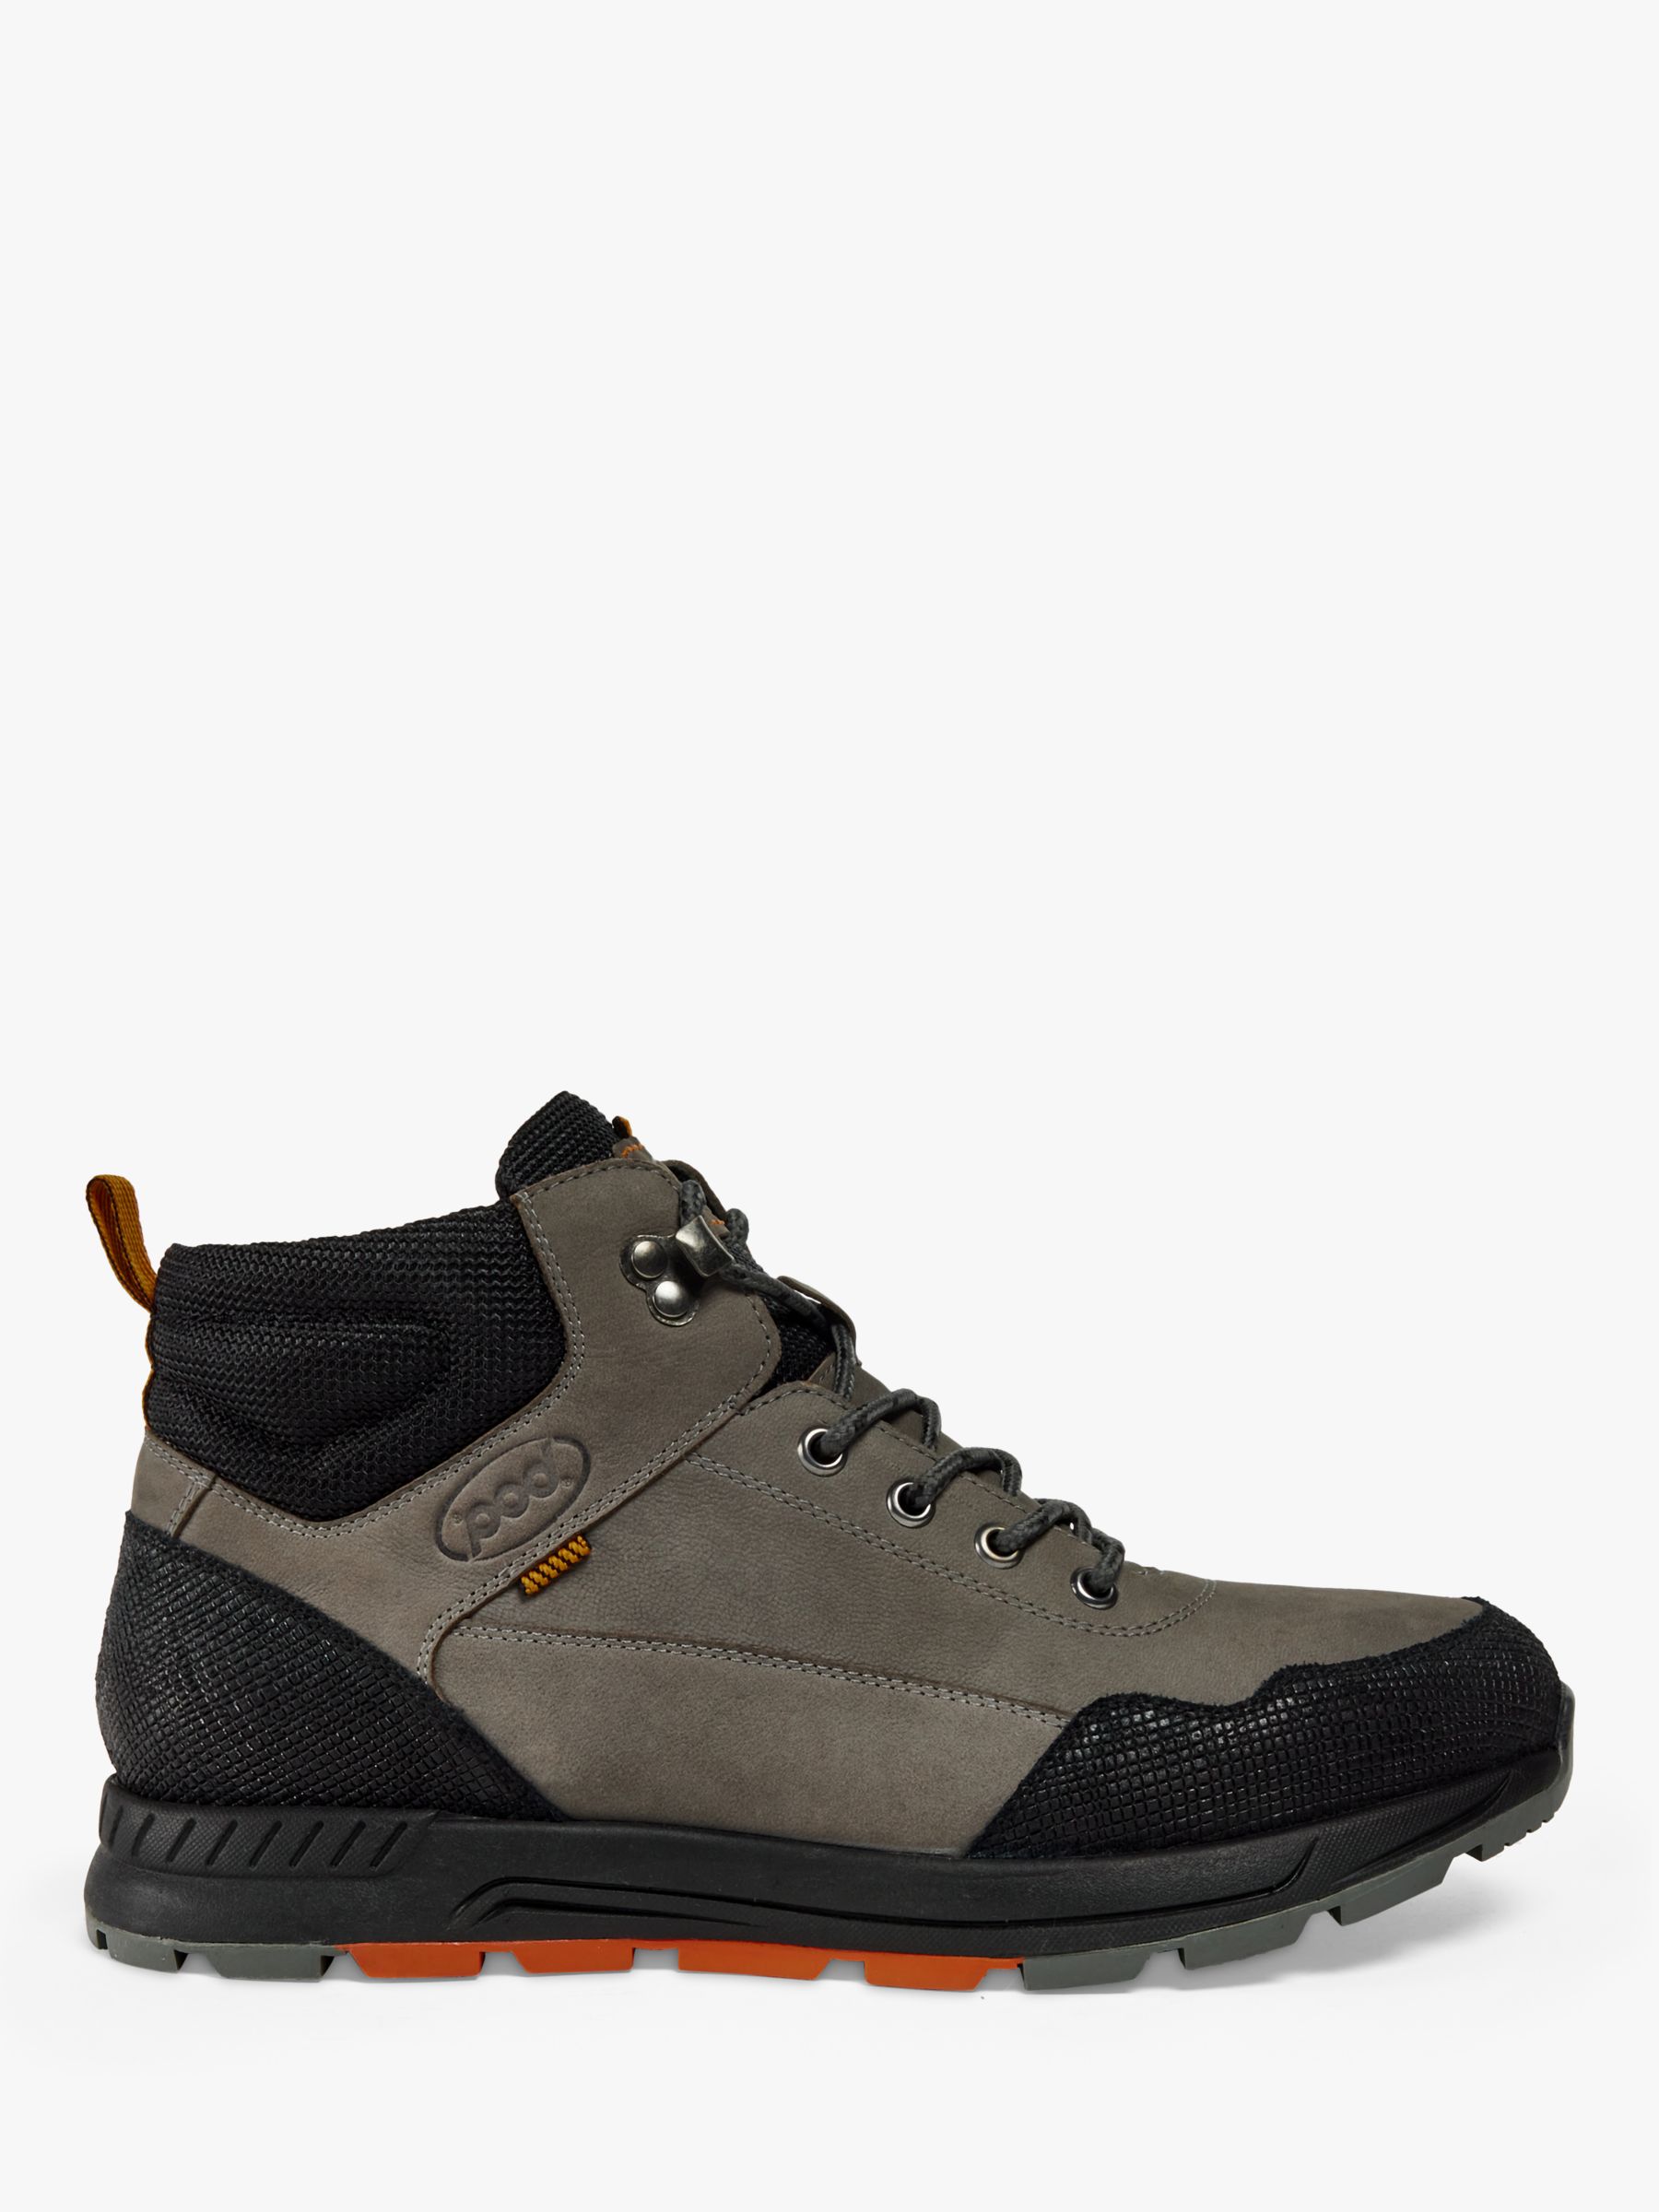 Pod Clive Leather Outdoor Boots, Grey at John Lewis & Partners